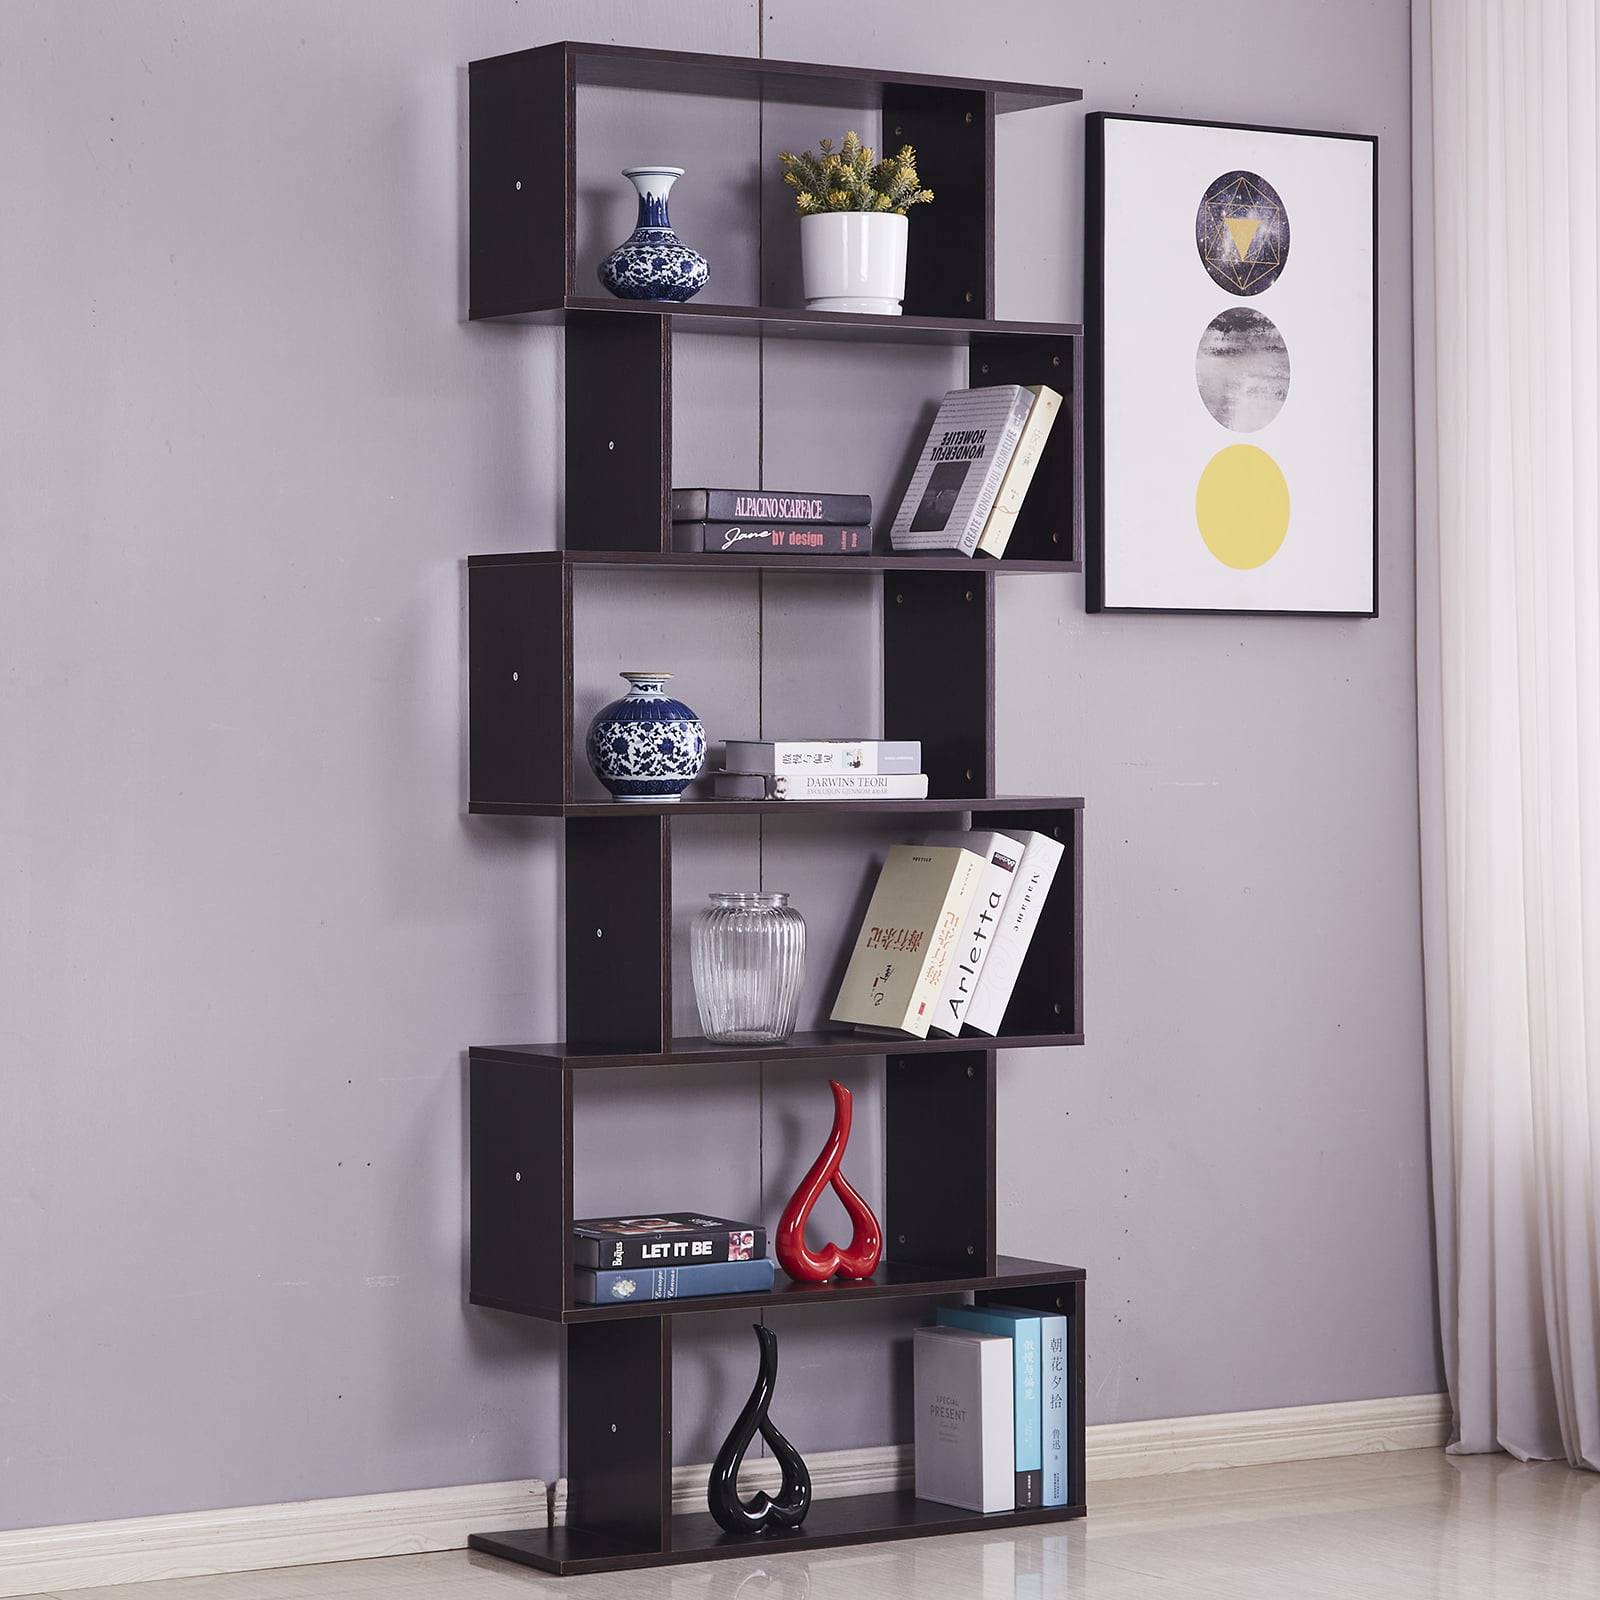 Details about   75.5" 6Tier Z-Shelf Style Bookshelf Wooden Storage Display Stand for Home Office 